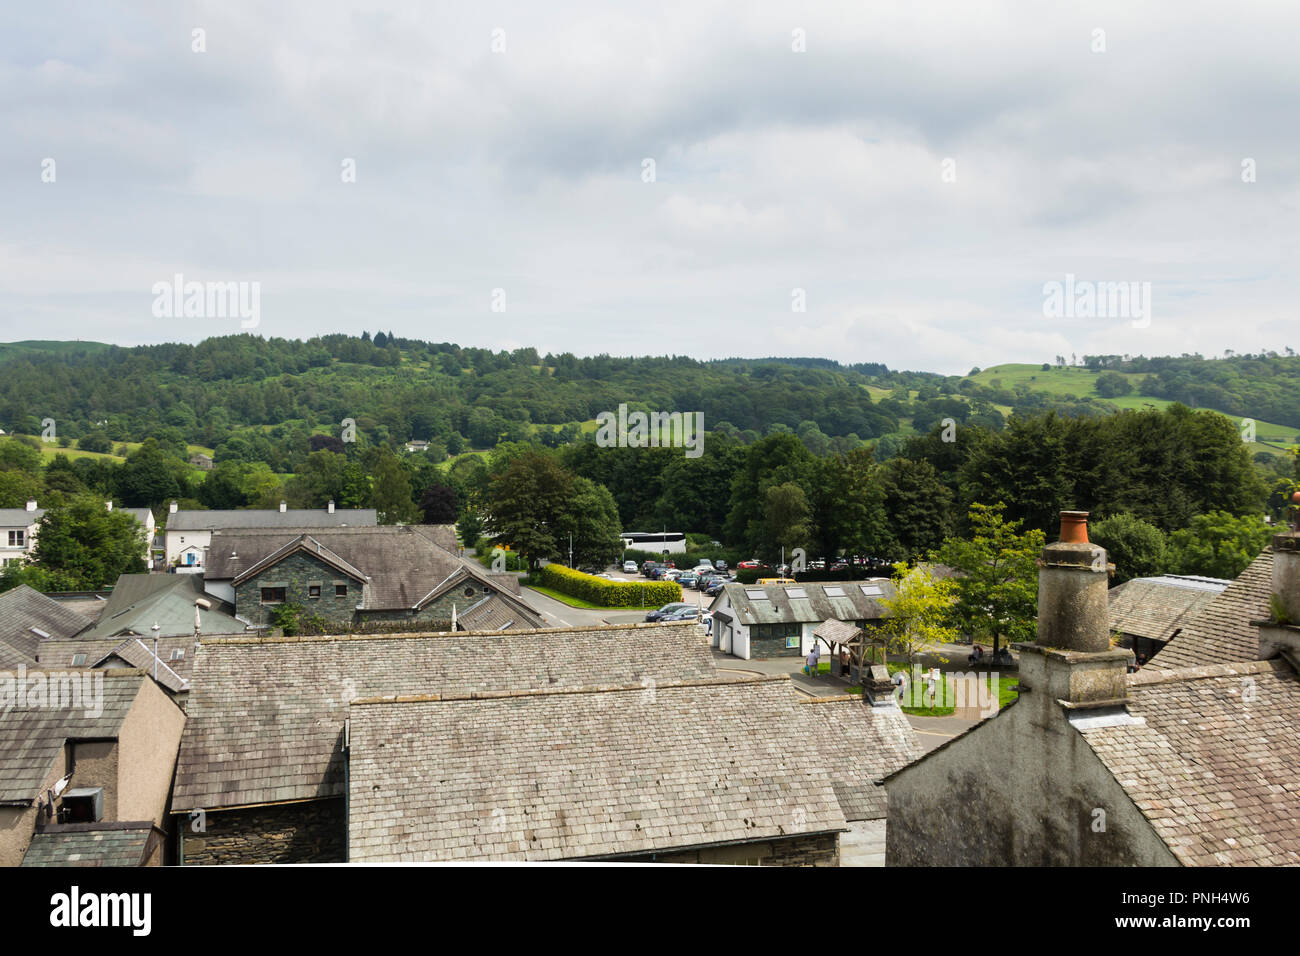 Rooftops of the village of Hawkshead in Cumbria, looking west from the mount of St. Michael and All Angels church. Stock Photo